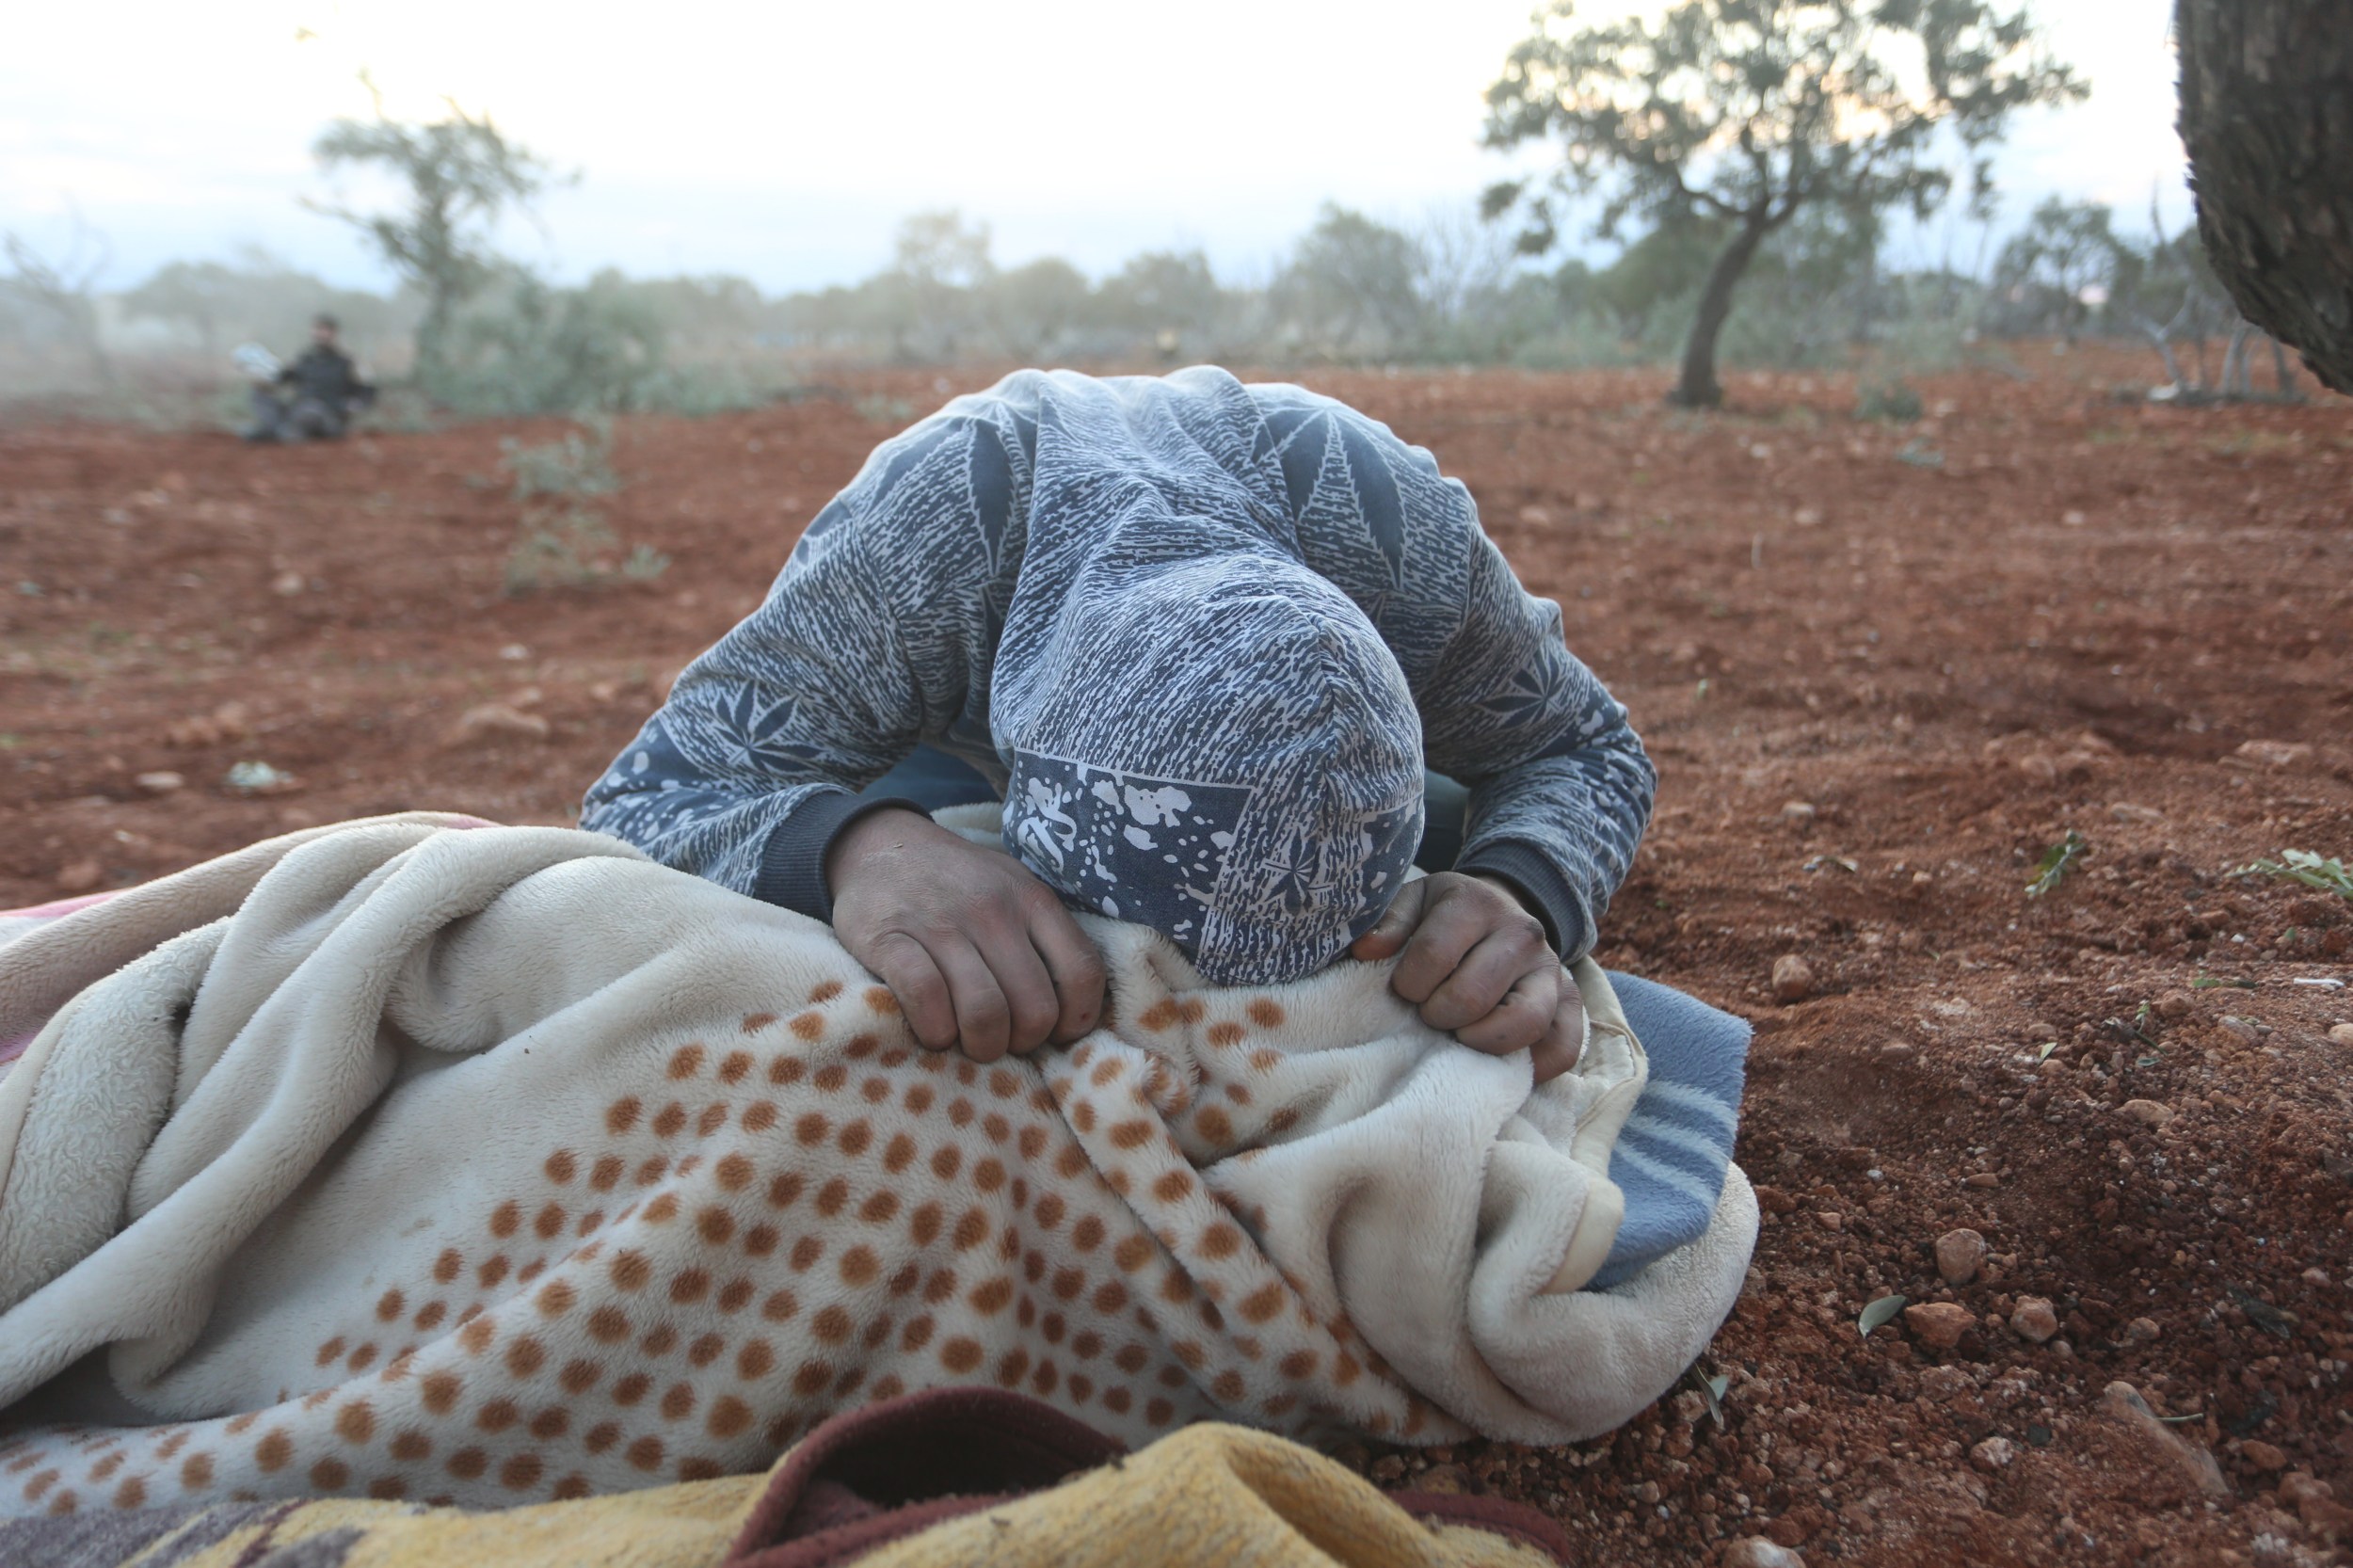 A young Syrian mourns over the body of a relative killed in an air strike in Sarmeen in the eastern Idlib province on 2 February 2020 (MEE/Ali Haj Suleiman)